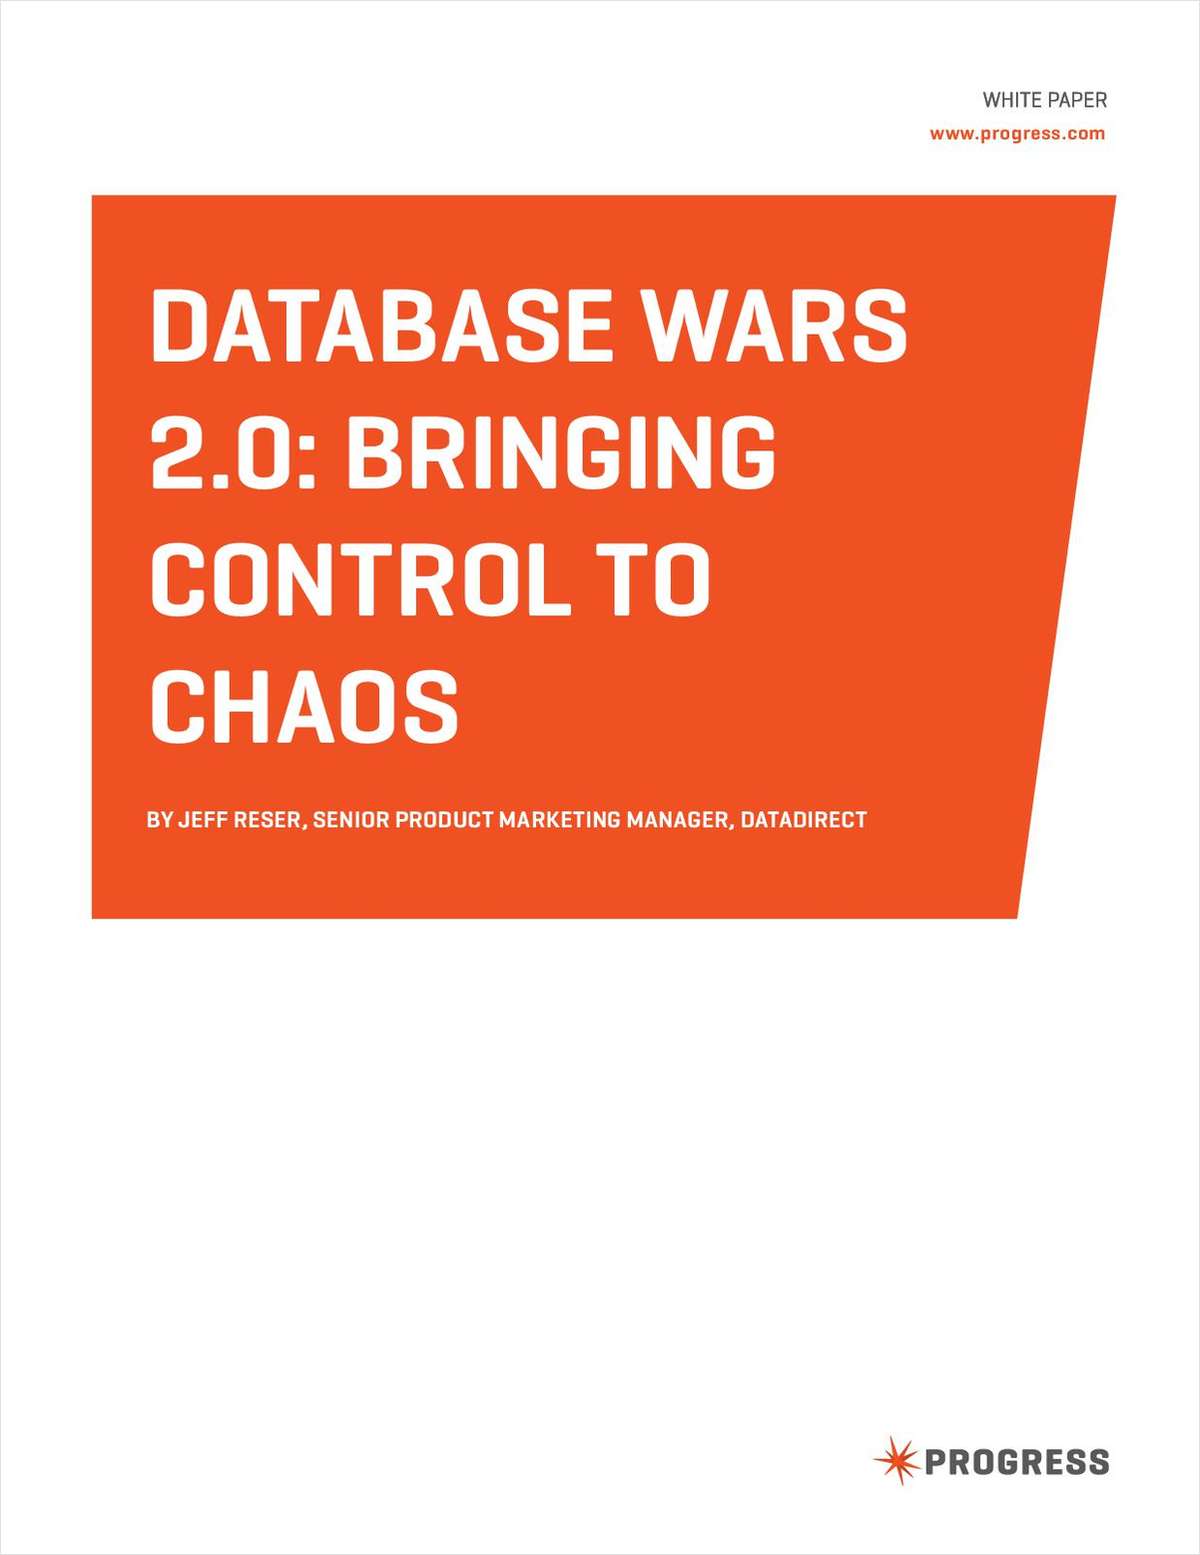 Database Wars 2.0: Bringing Control To Chaos